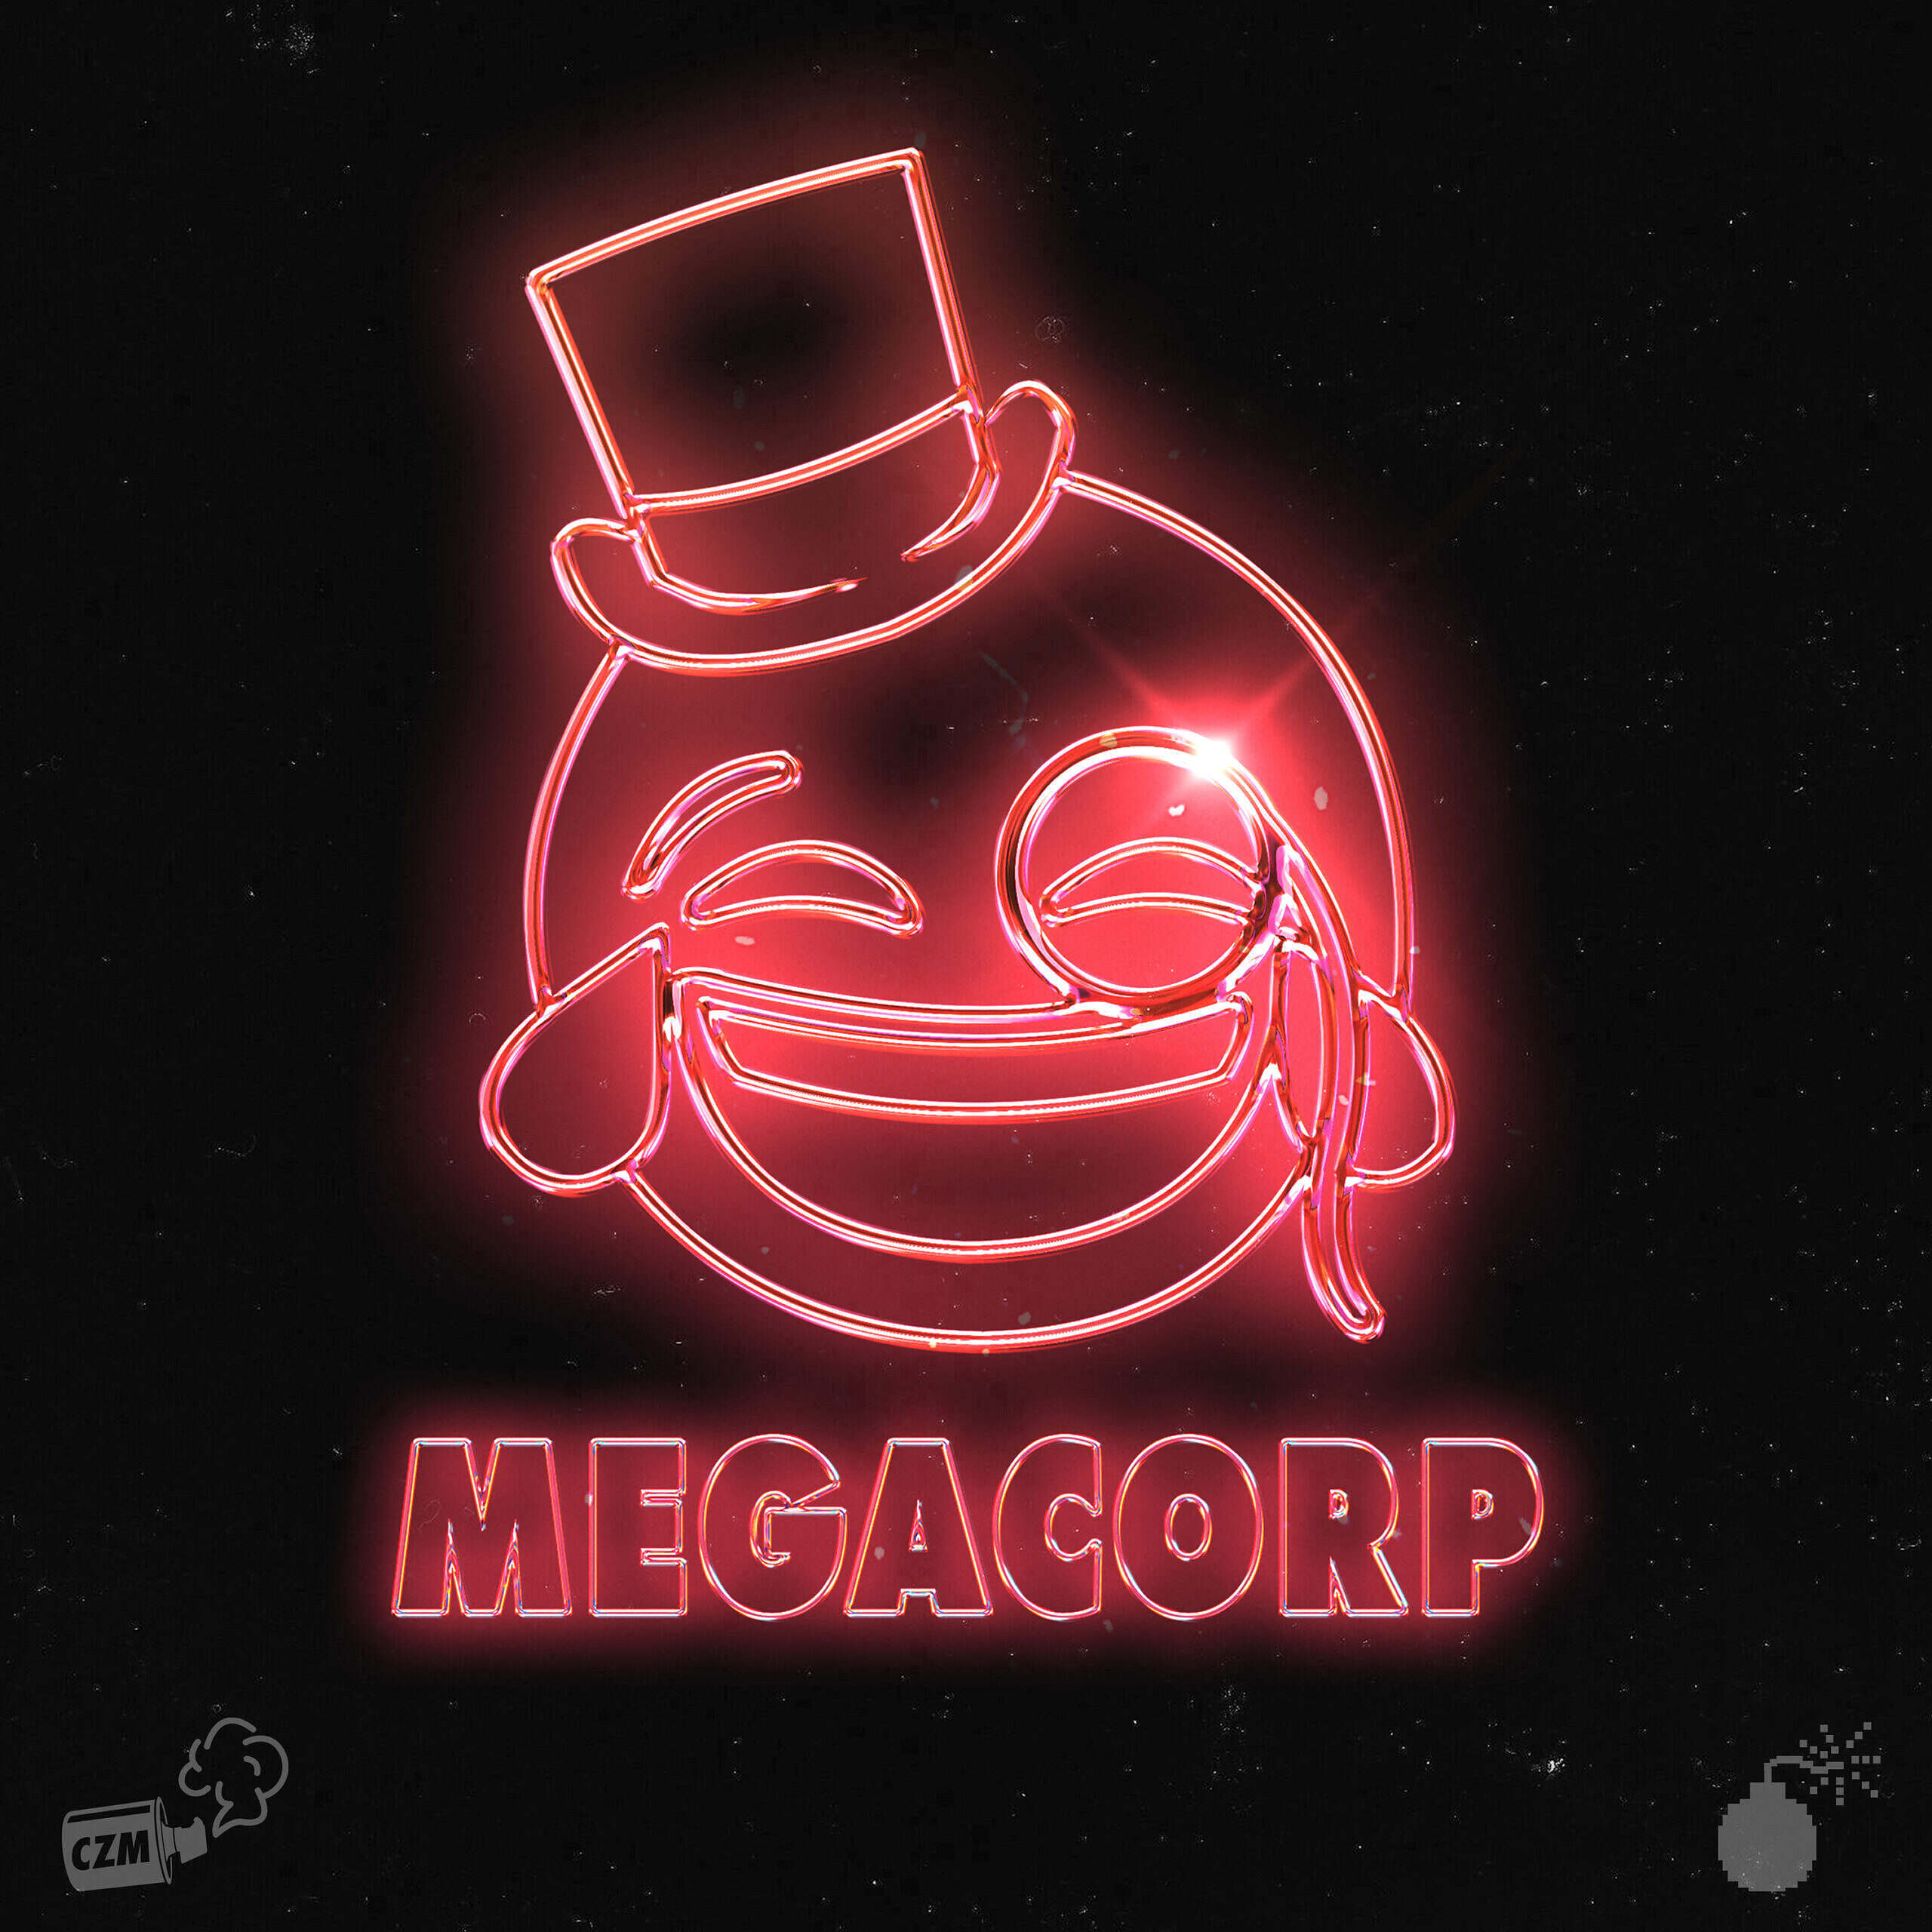 Listen To The 'Megacorp' Podcast Here...